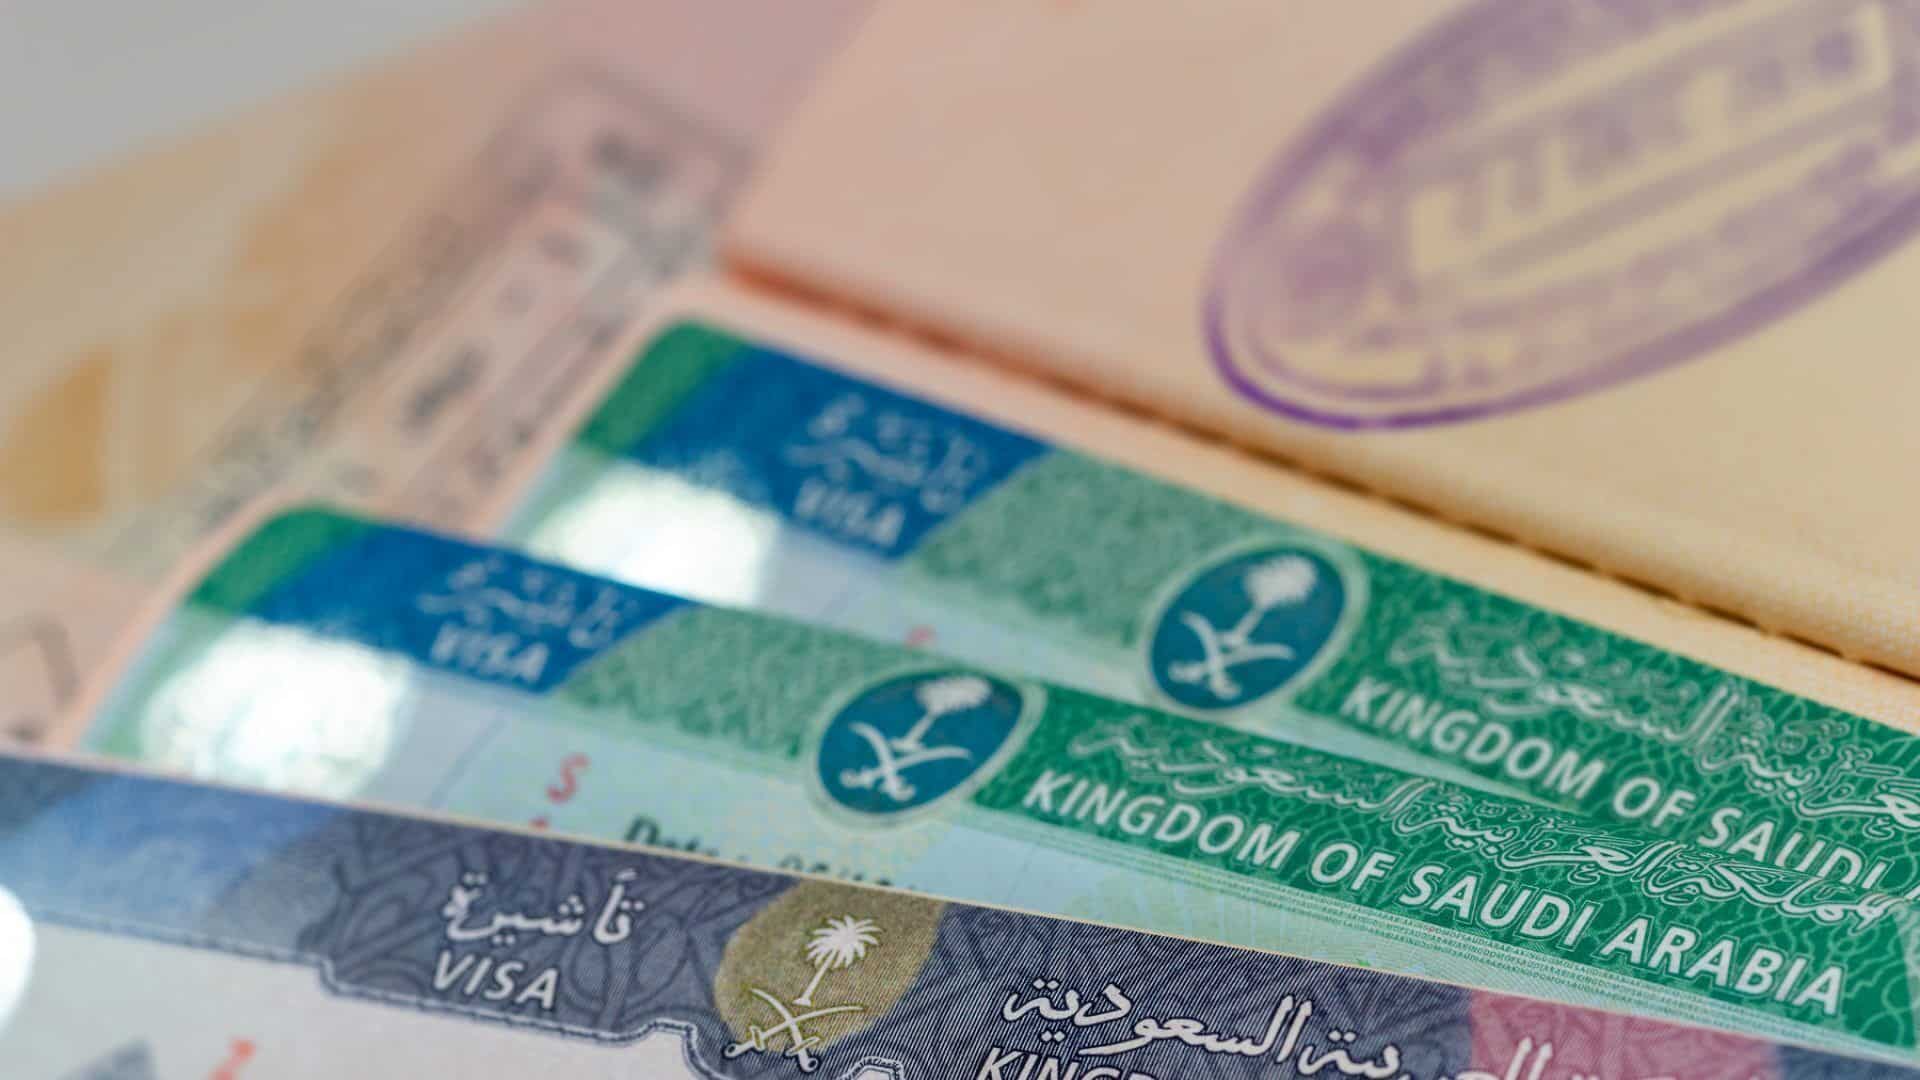 Multiple-entry visit visas can be renewed without leaving the country